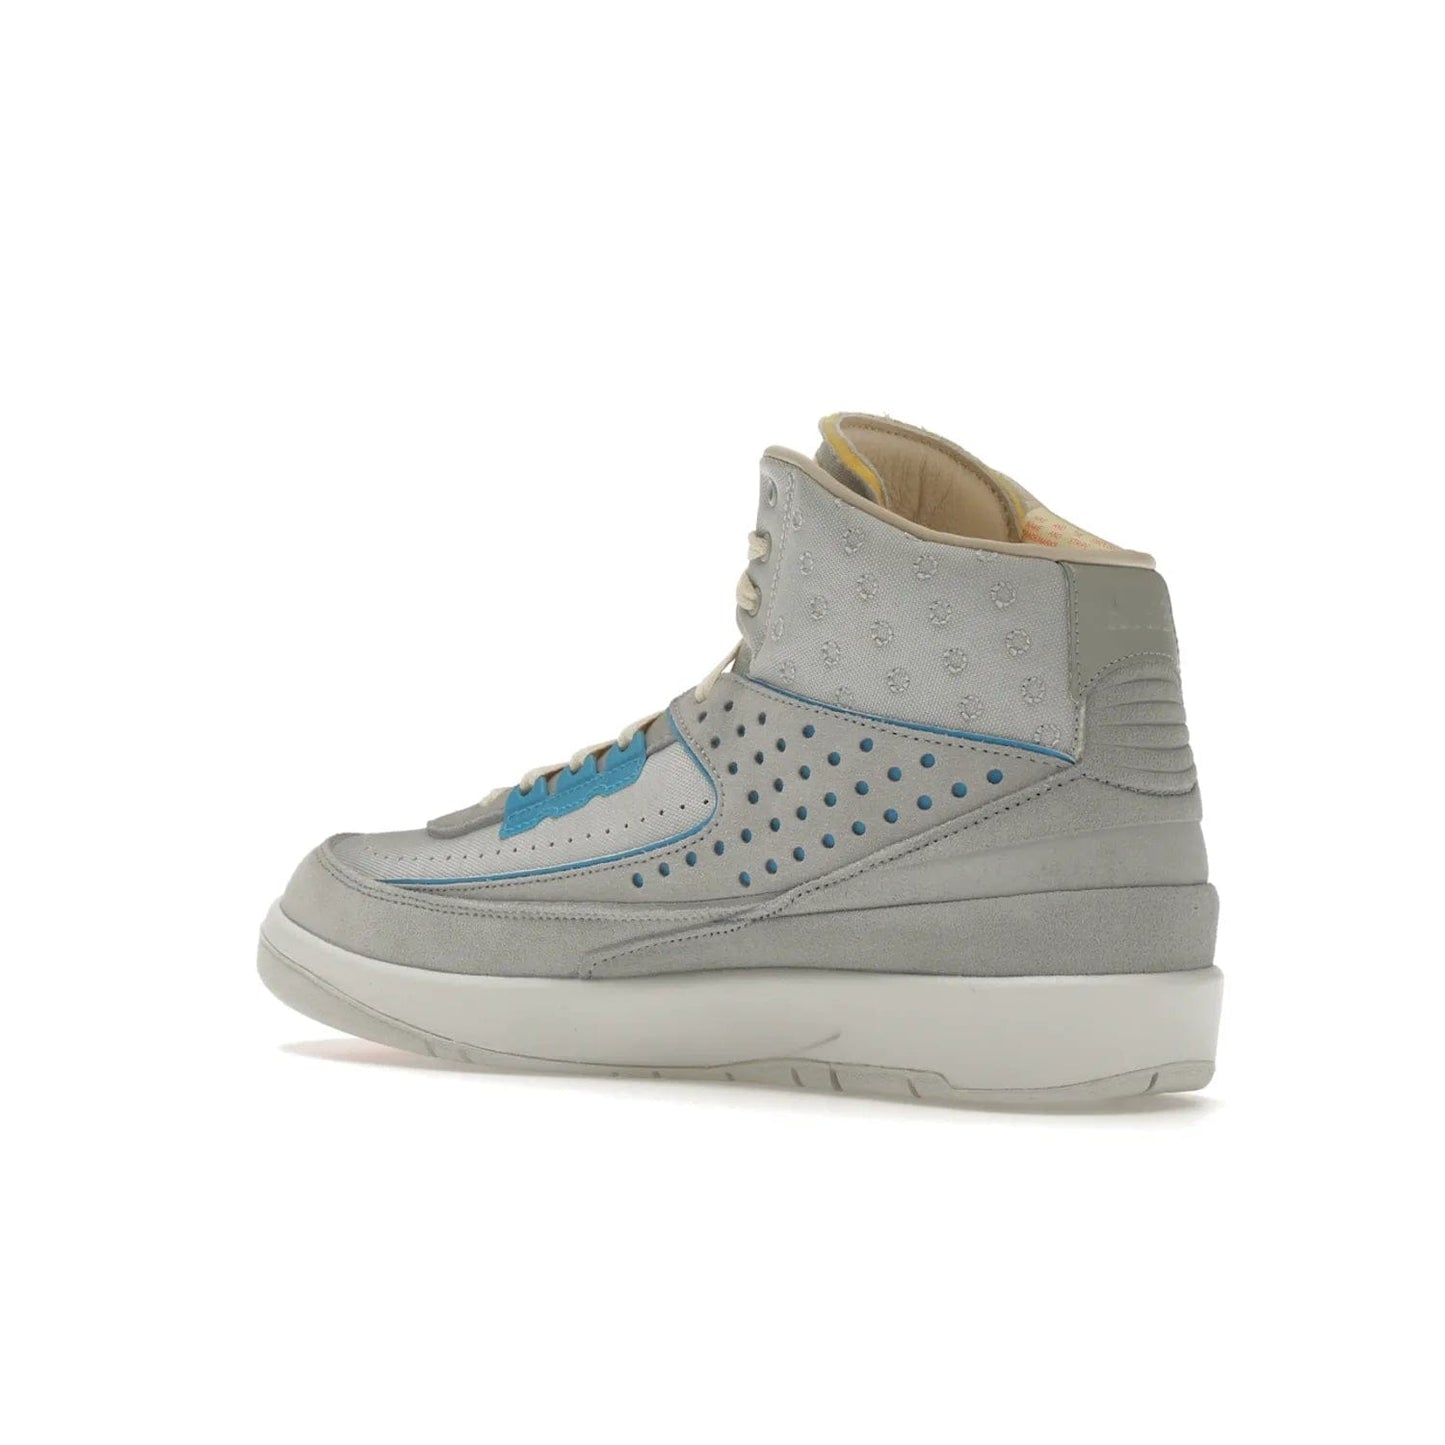 Jordan 2 Retro SP Union Grey Fog - Image 23 - Only at www.BallersClubKickz.com - Introducing the Air Jordan 2 Retro SP Union Grey Fog. This intricate sneaker design features a grey canvas upper with light blue eyelets, eyestay patches, and piping, plus custom external tags. Dropping in April 2022, this exclusive release offers a worn-in look and feel.